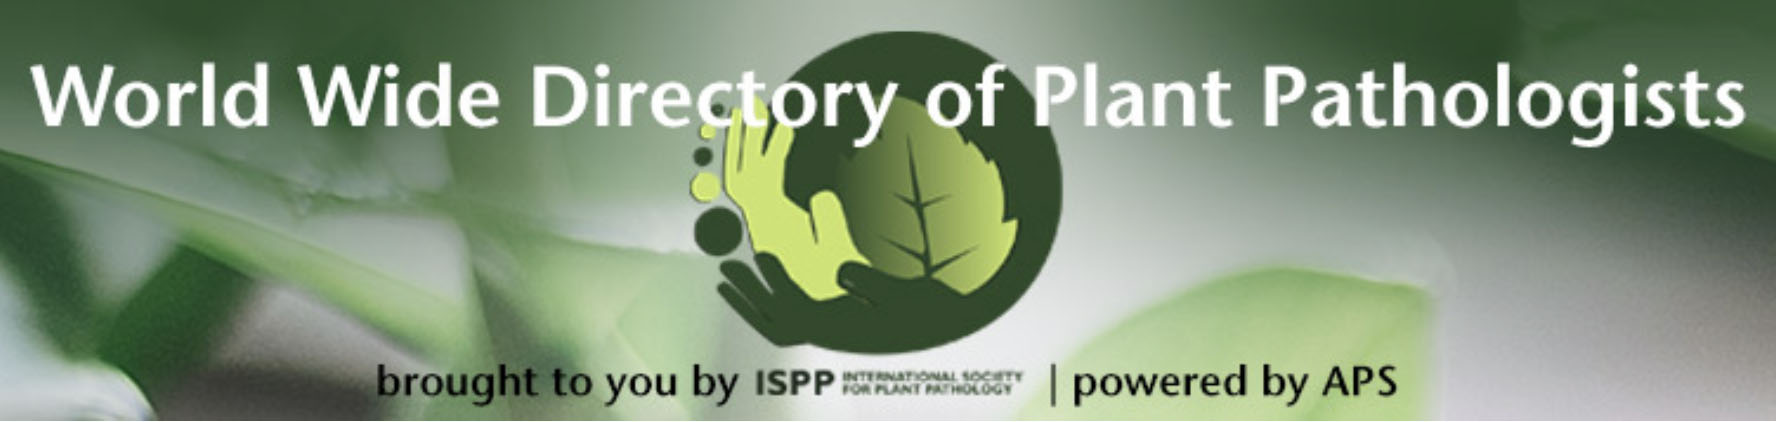 World Wide Directory of Plant Pathologists